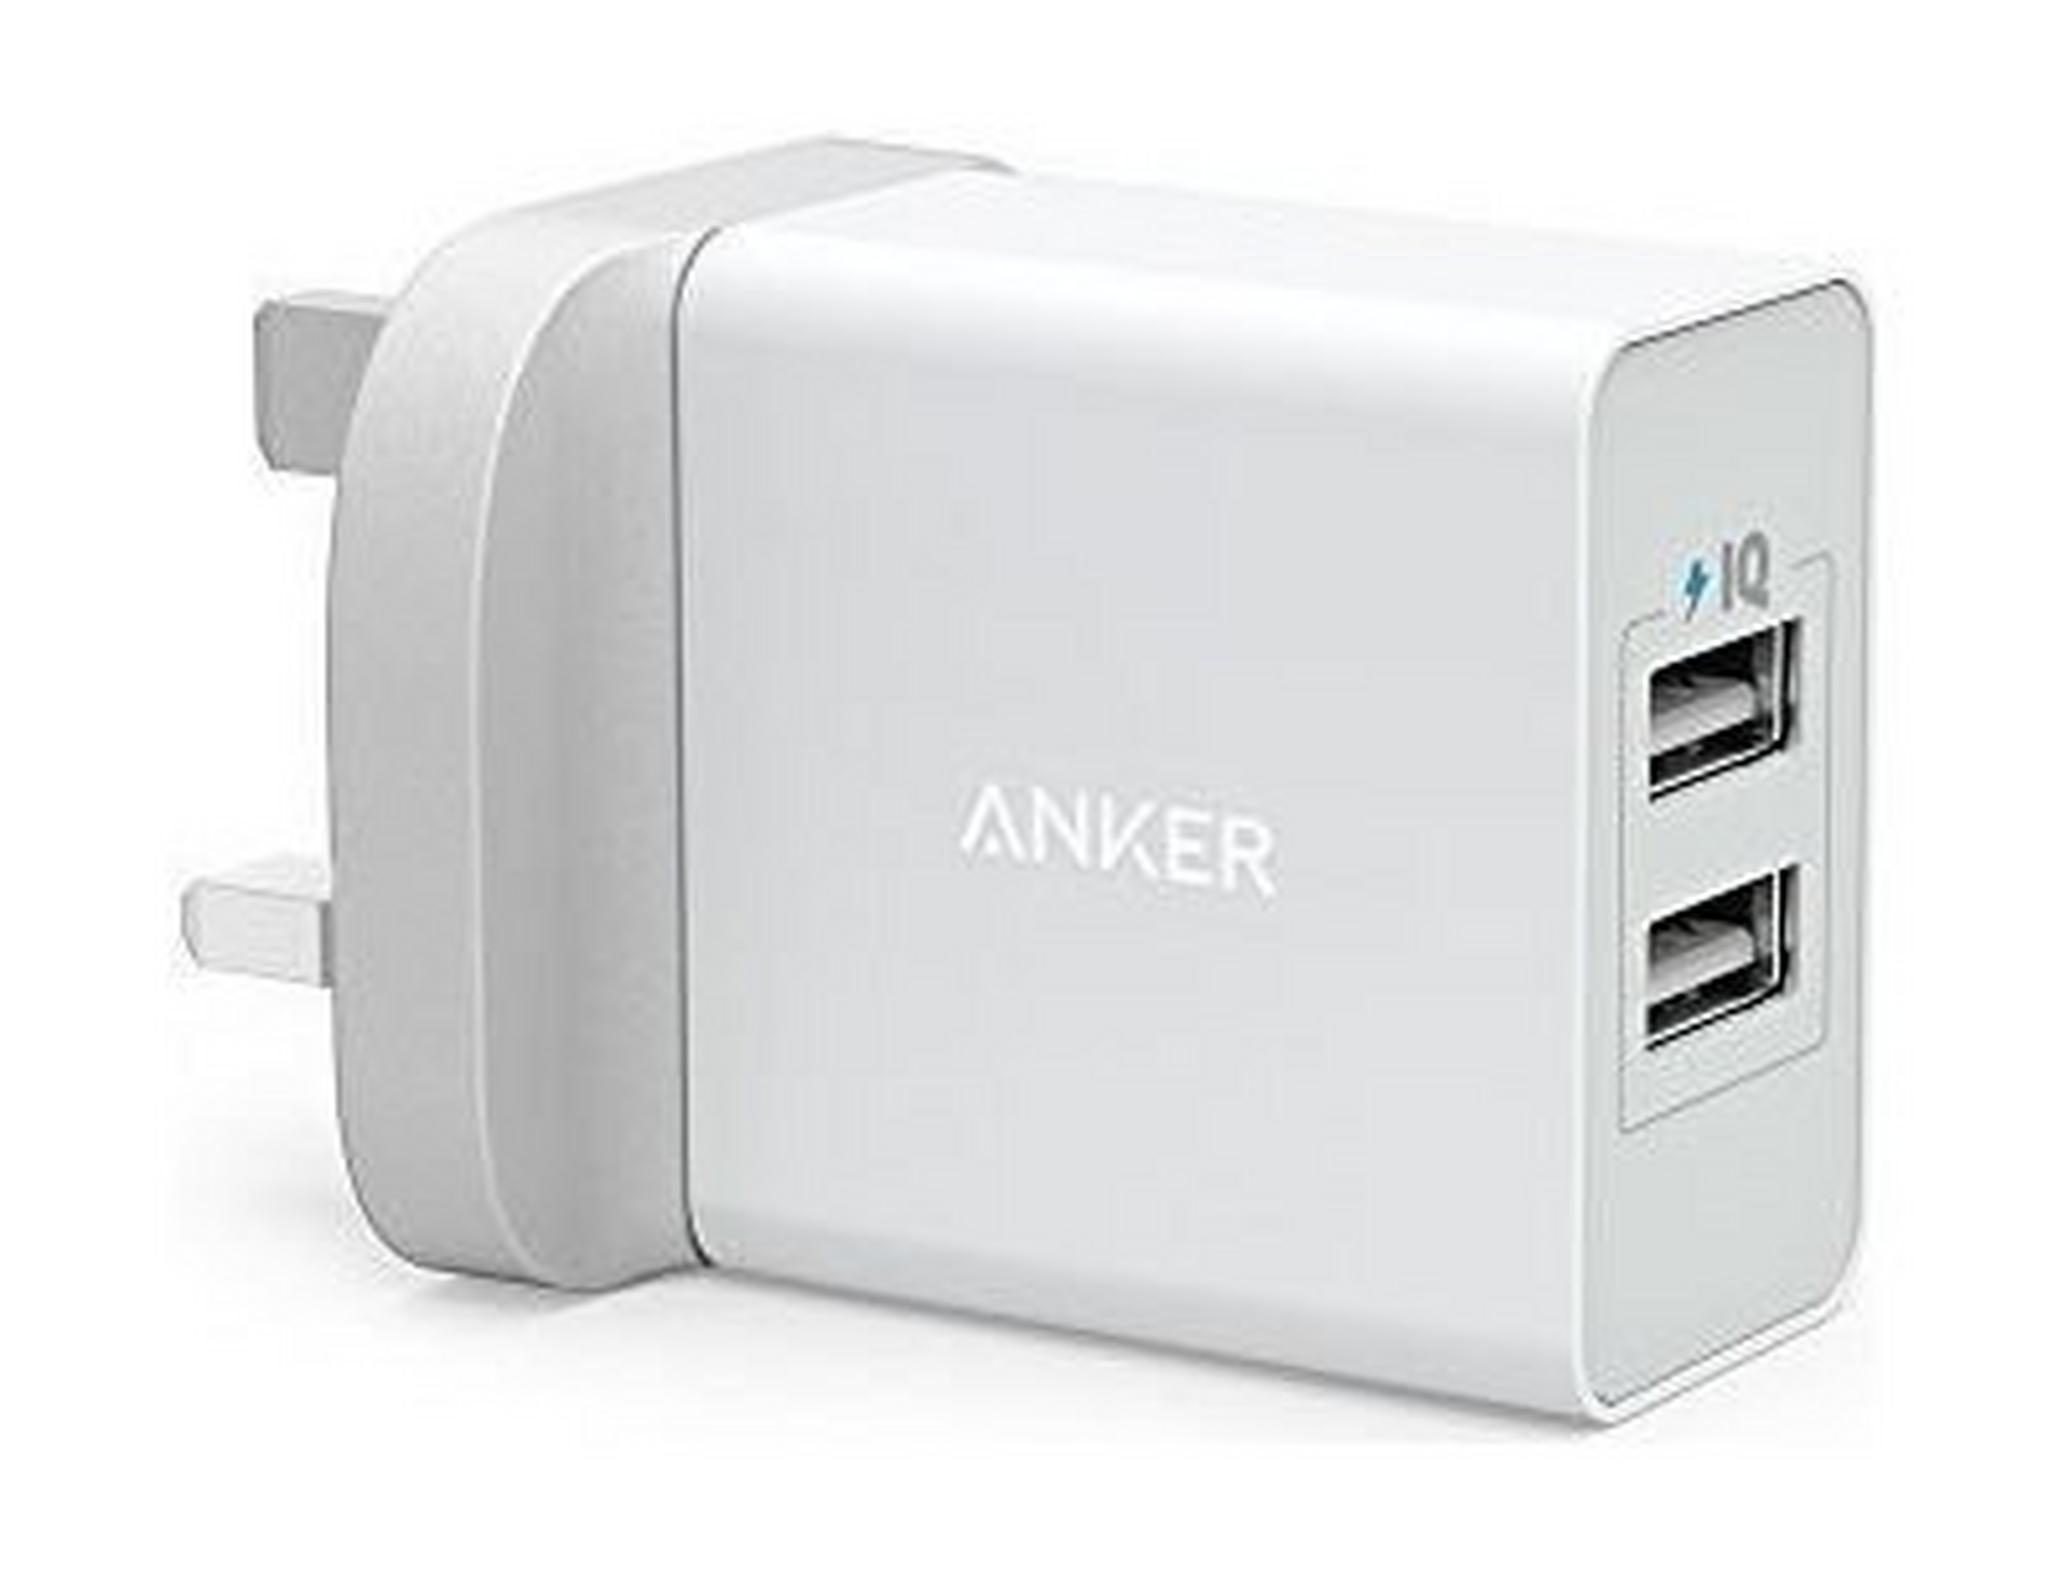 Anker PowerPort 2 Ports Wall Charger - White